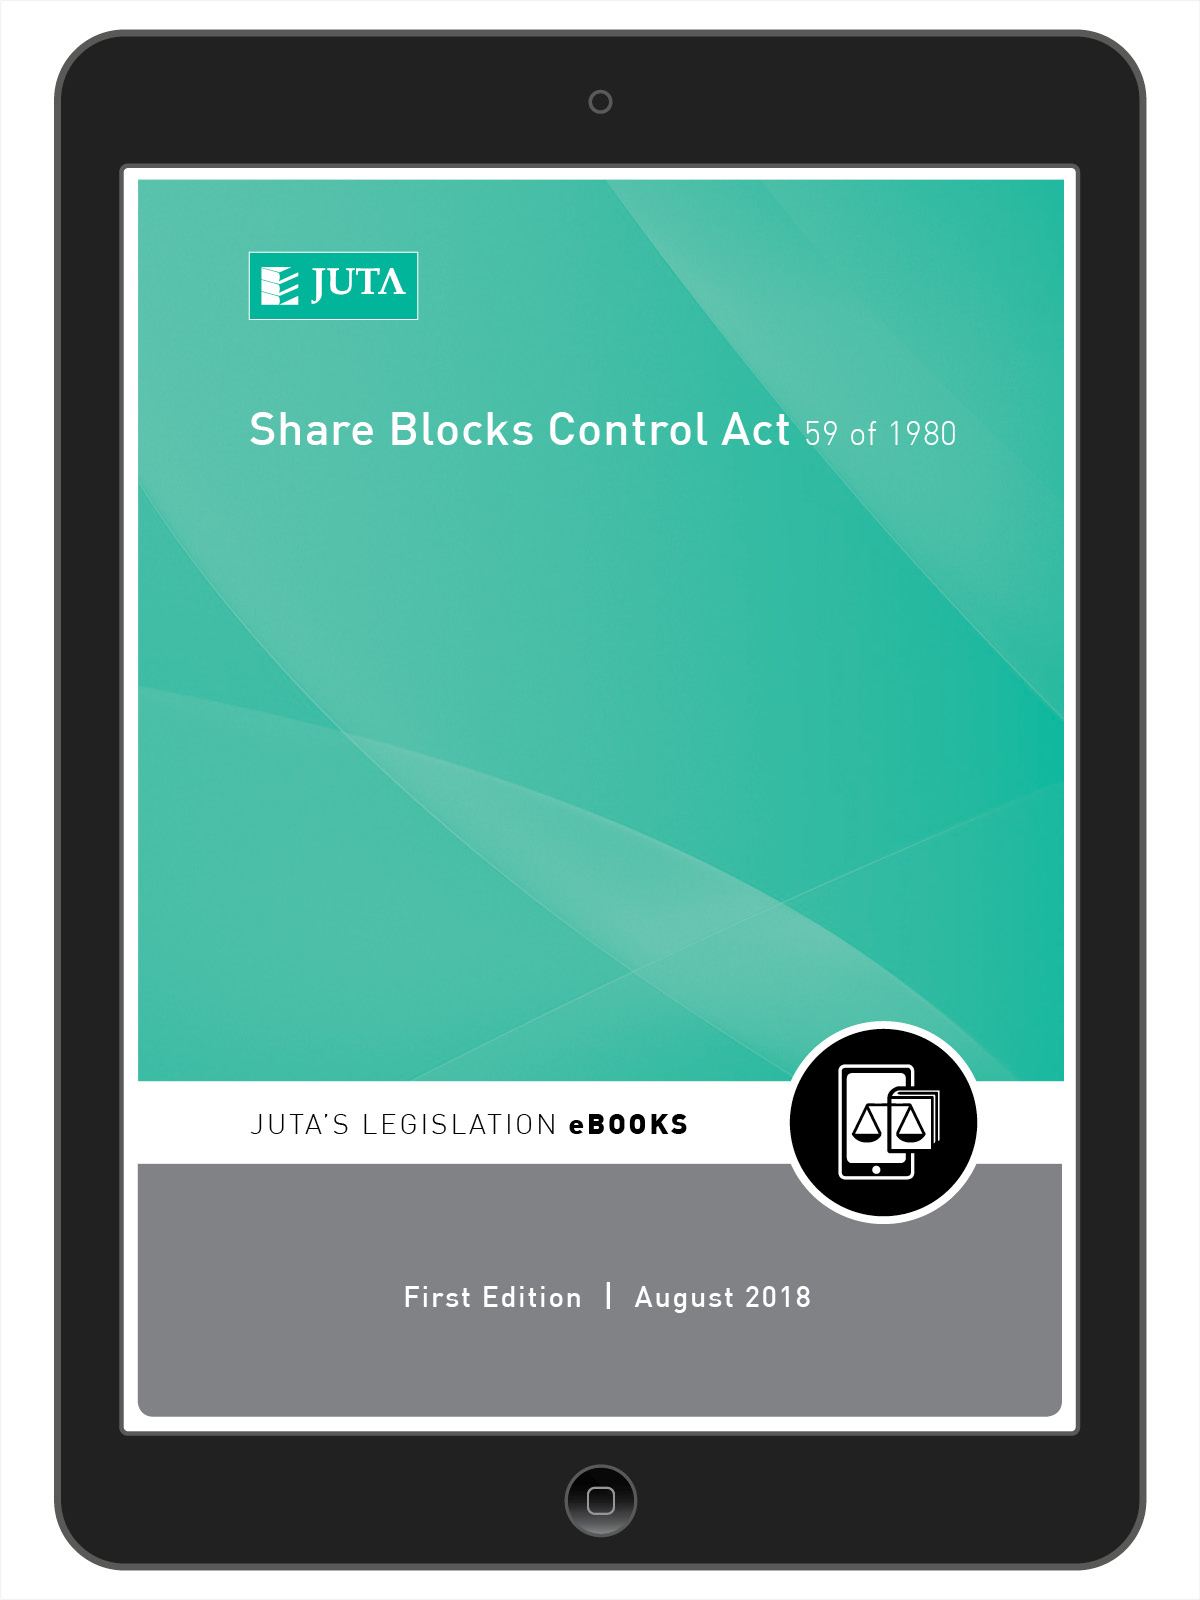 Share Blocks Control Act 59 of 1980